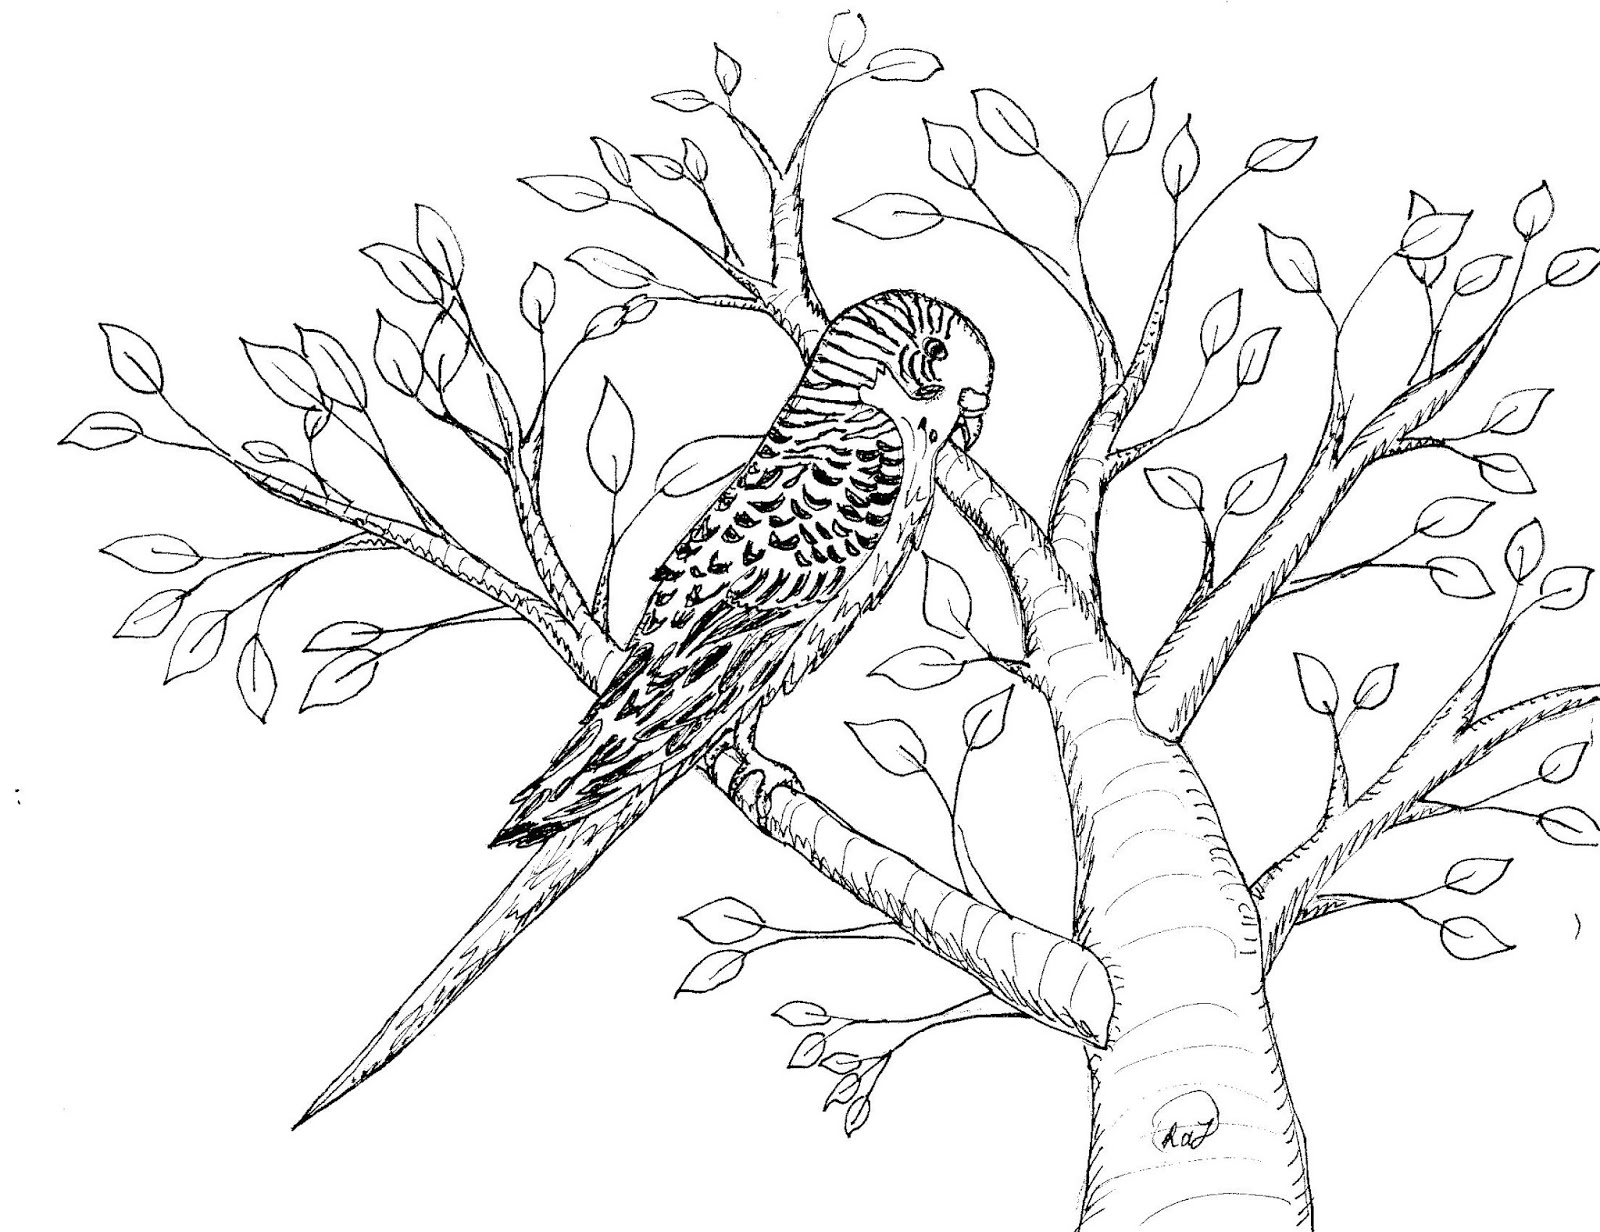 Robin's Great Coloring Pages: Budgerigar or Parakeet